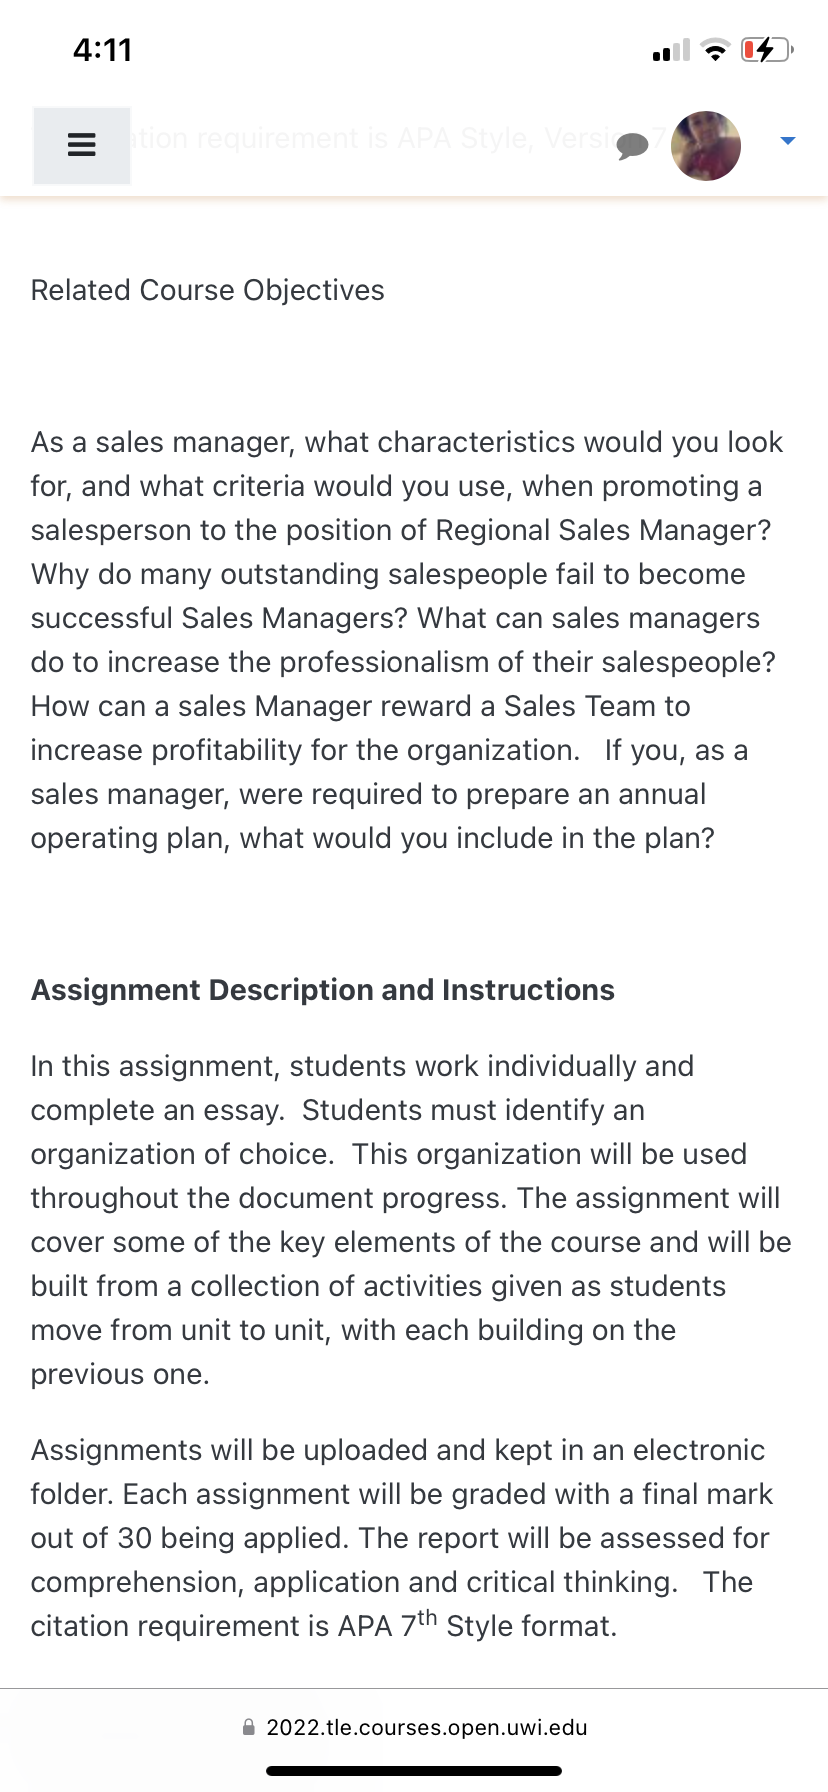 4:11
Eation requirement is APA Style, Versic
Related Course Objectives
As a sales manager, what characteristics would you look
for, and what criteria would you use, when promoting a
salesperson to the position of Regional Sales Manager?
Why do many outstanding salespeople fail to become
successful Sales Managers? What can sales managers
do to increase the professionalism of their salespeople?
How can a sales Manager reward a Sales Team to
increase profitability for the organization. If you, as a
sales manager, were required to prepare an annual
operating plan, what would you include in the plan?
Assignment Description and Instructions
In this assignment, students work individually and
complete an essay. Students must identify an
organization of choice. This organization will be used
throughout the document progress. The assignment will
cover some of the key elements of the course and will be
built from a collection of activities given as students
move from unit to unit, with each building on the
previous one.
Assignments will be uploaded and kept in an electronic
folder. Each assignment will be graded with a final mark
out of 30 being applied. The report will be assessed for
comprehension, application and critical thinking. The
citation requirement is APA 7th Style format.
2022.tle.courses.open.uwi.edu